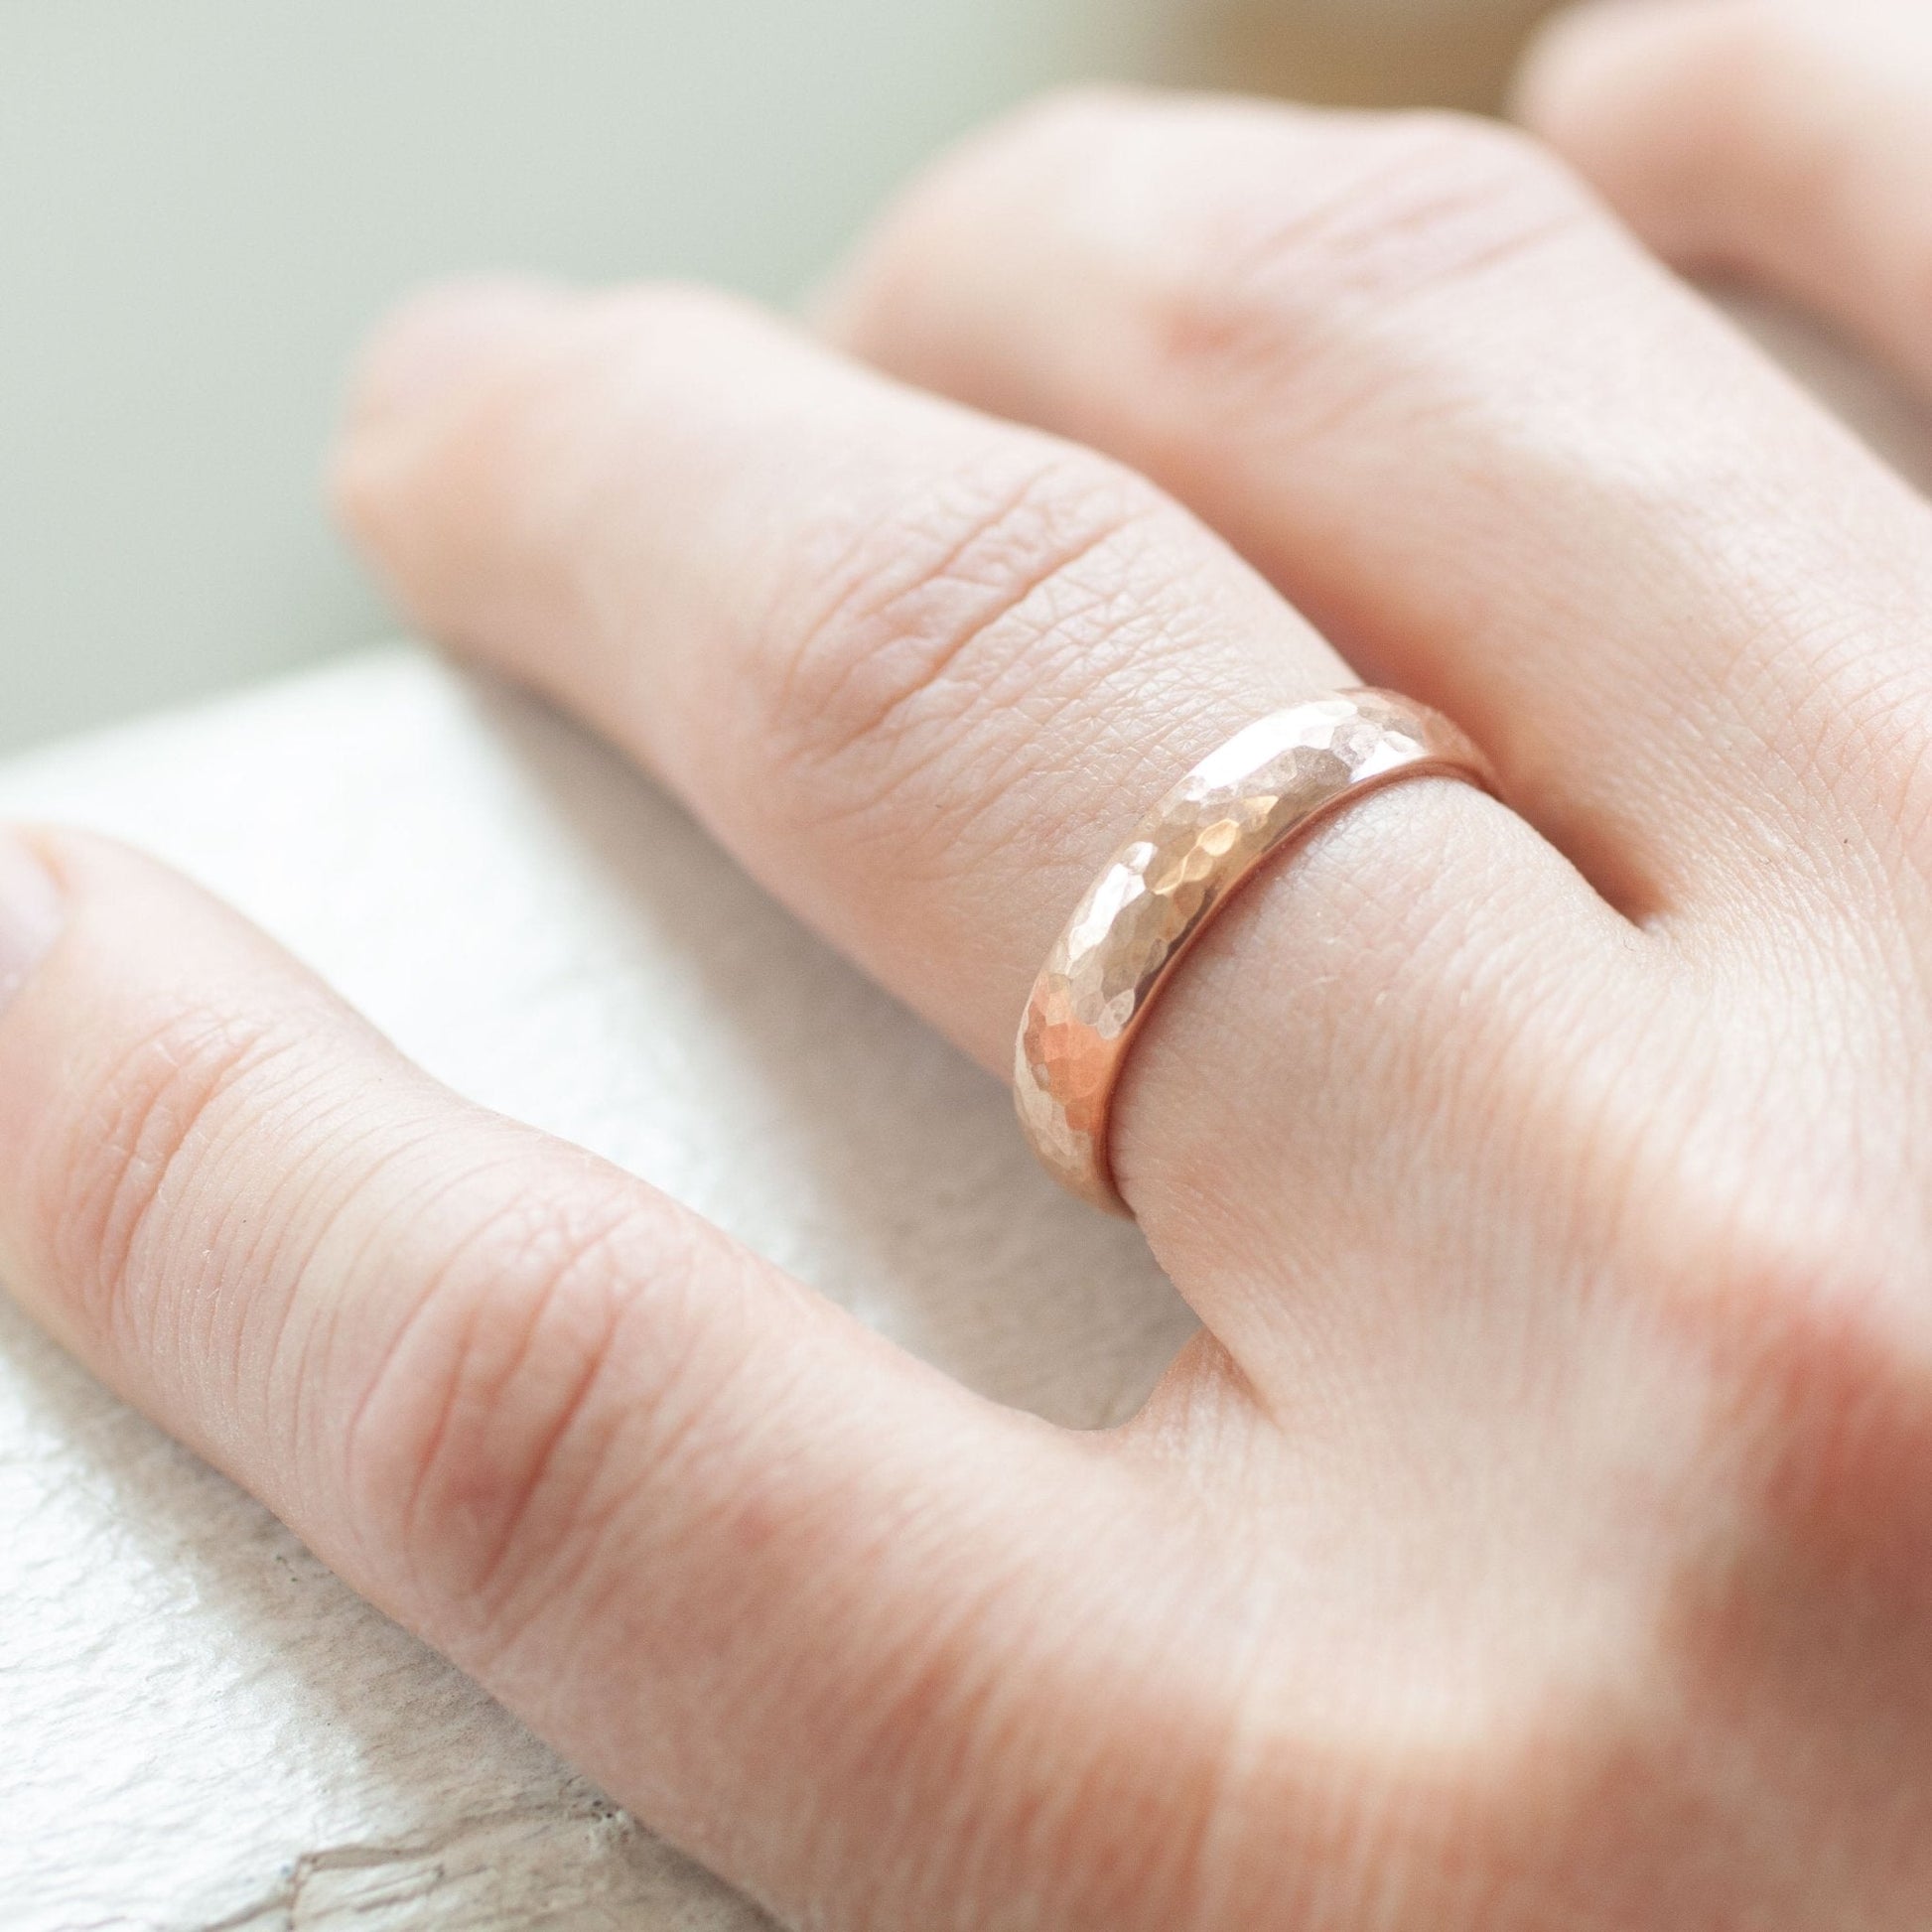 The Rose Gold Hammered Band - W.R. Metalarts